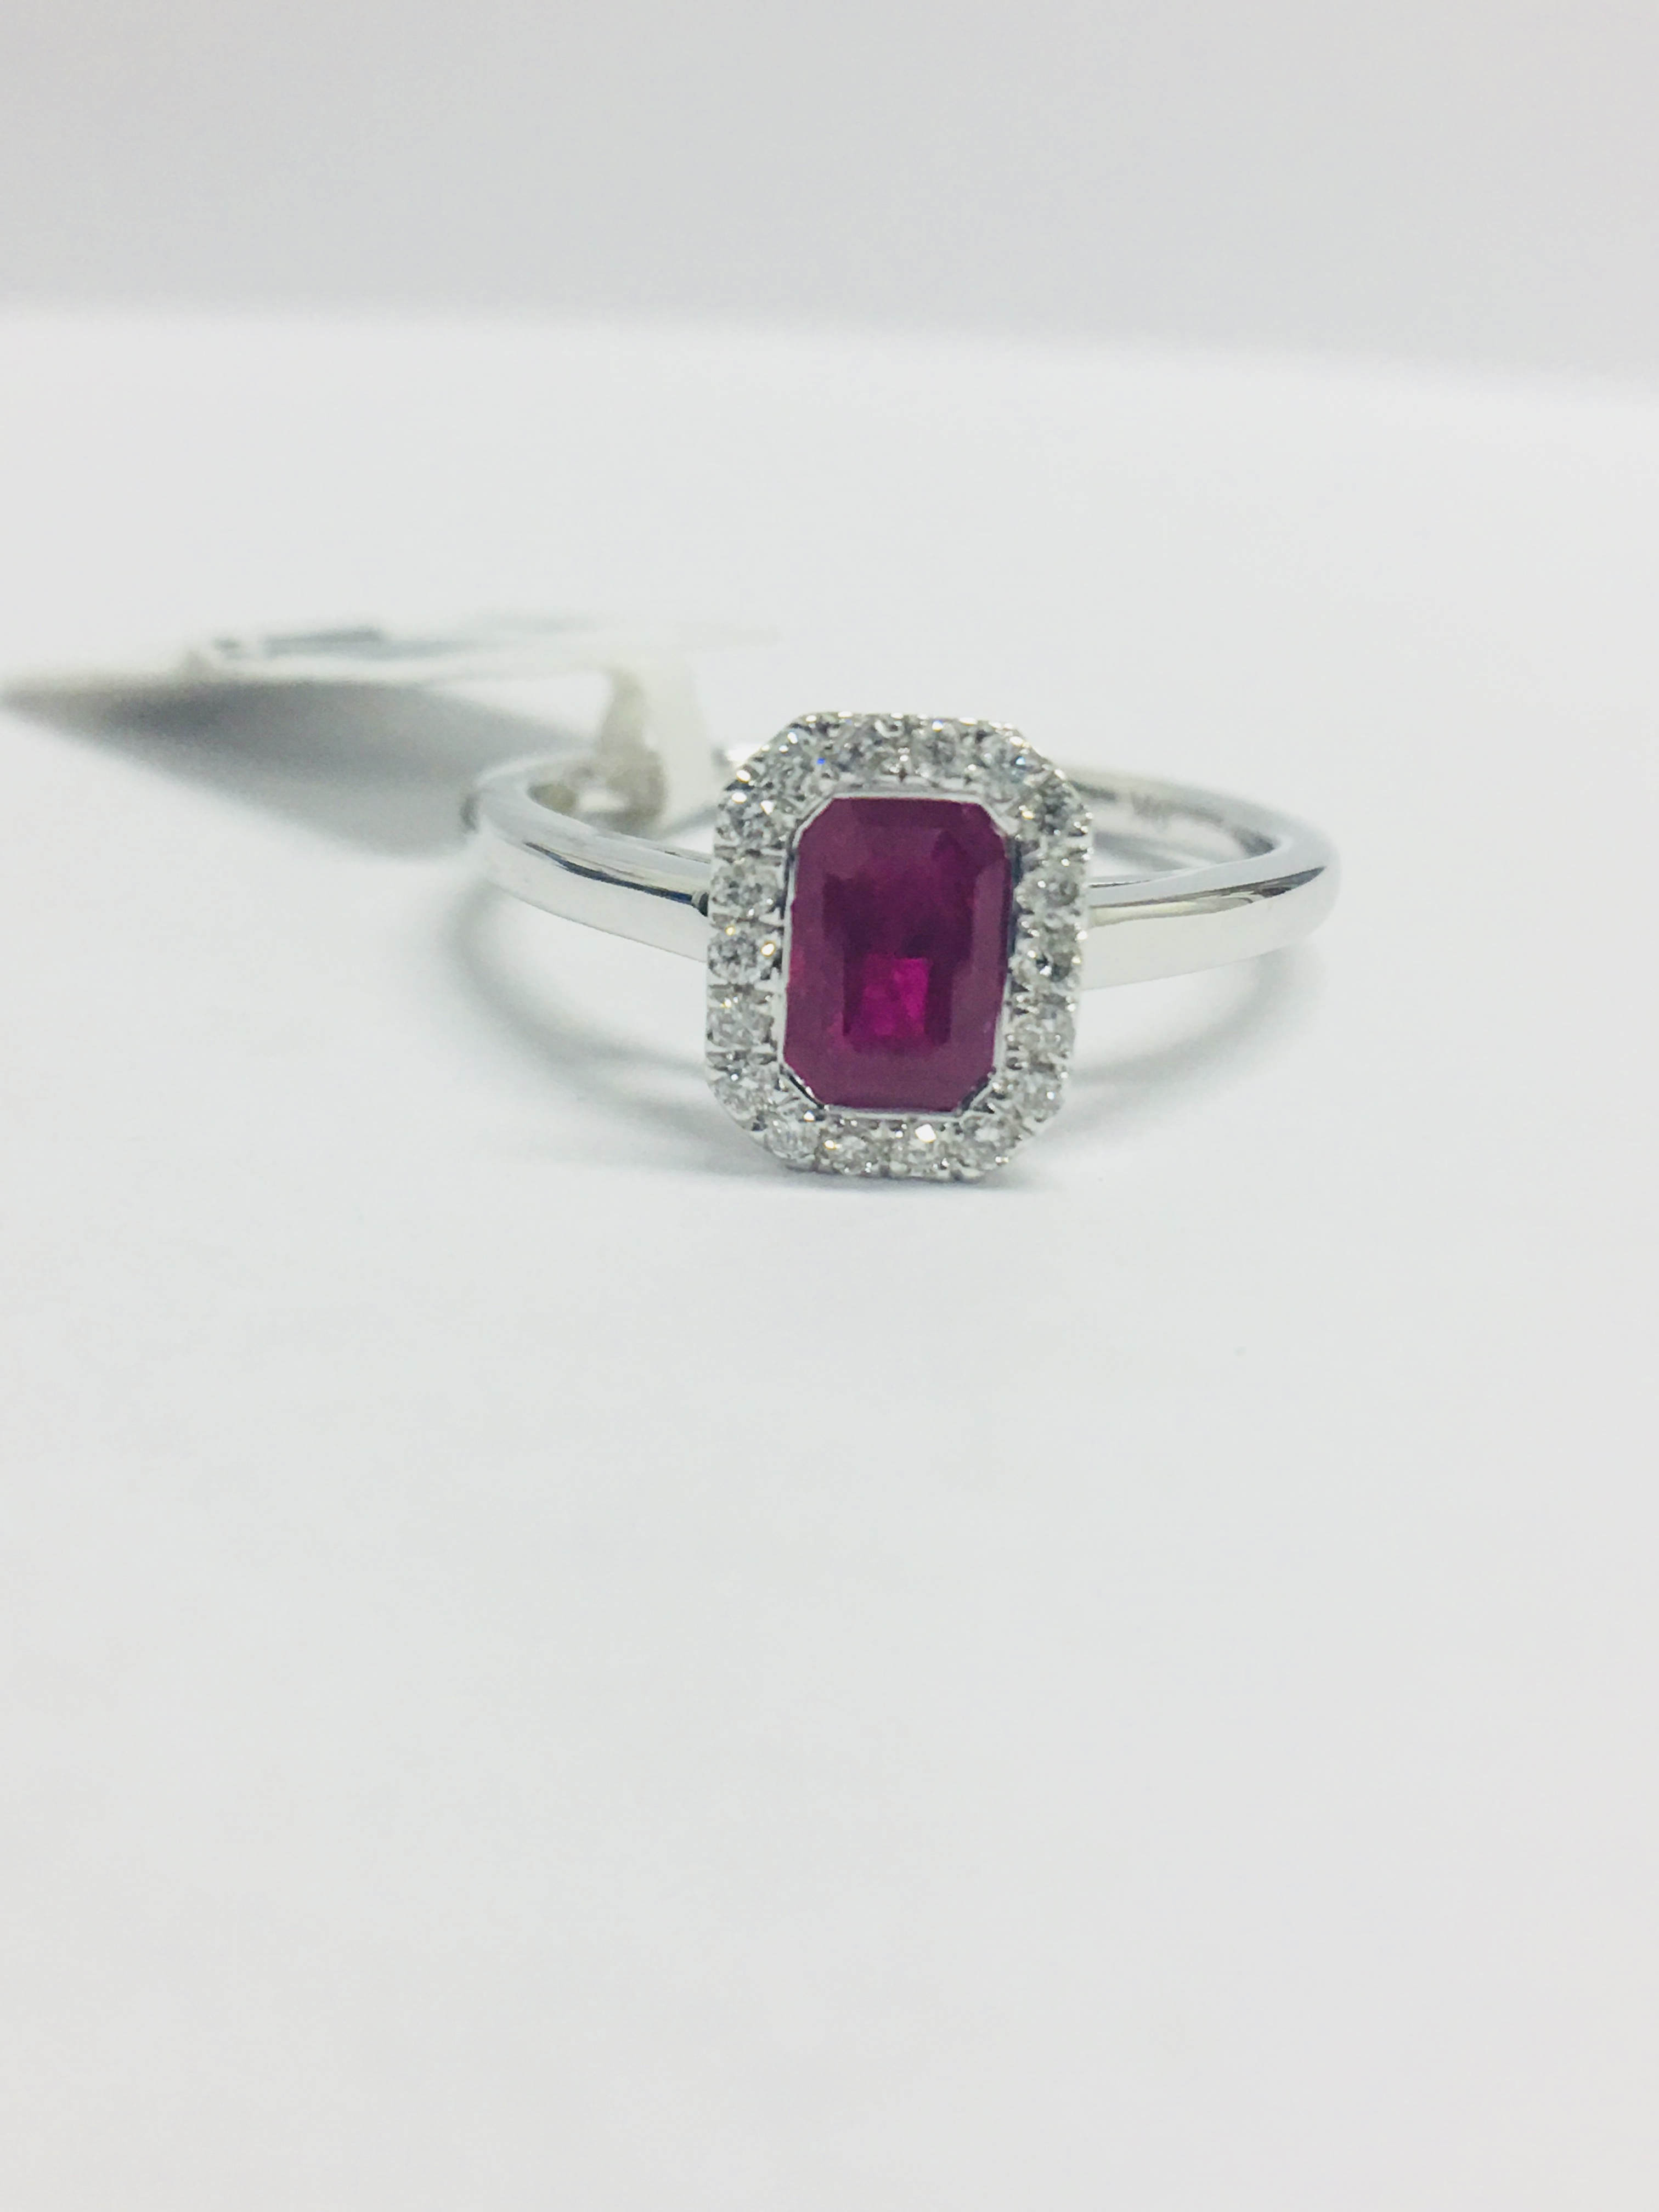 9Ct White Gold Ruby Diamond Cluster Ring, - Image 7 of 7